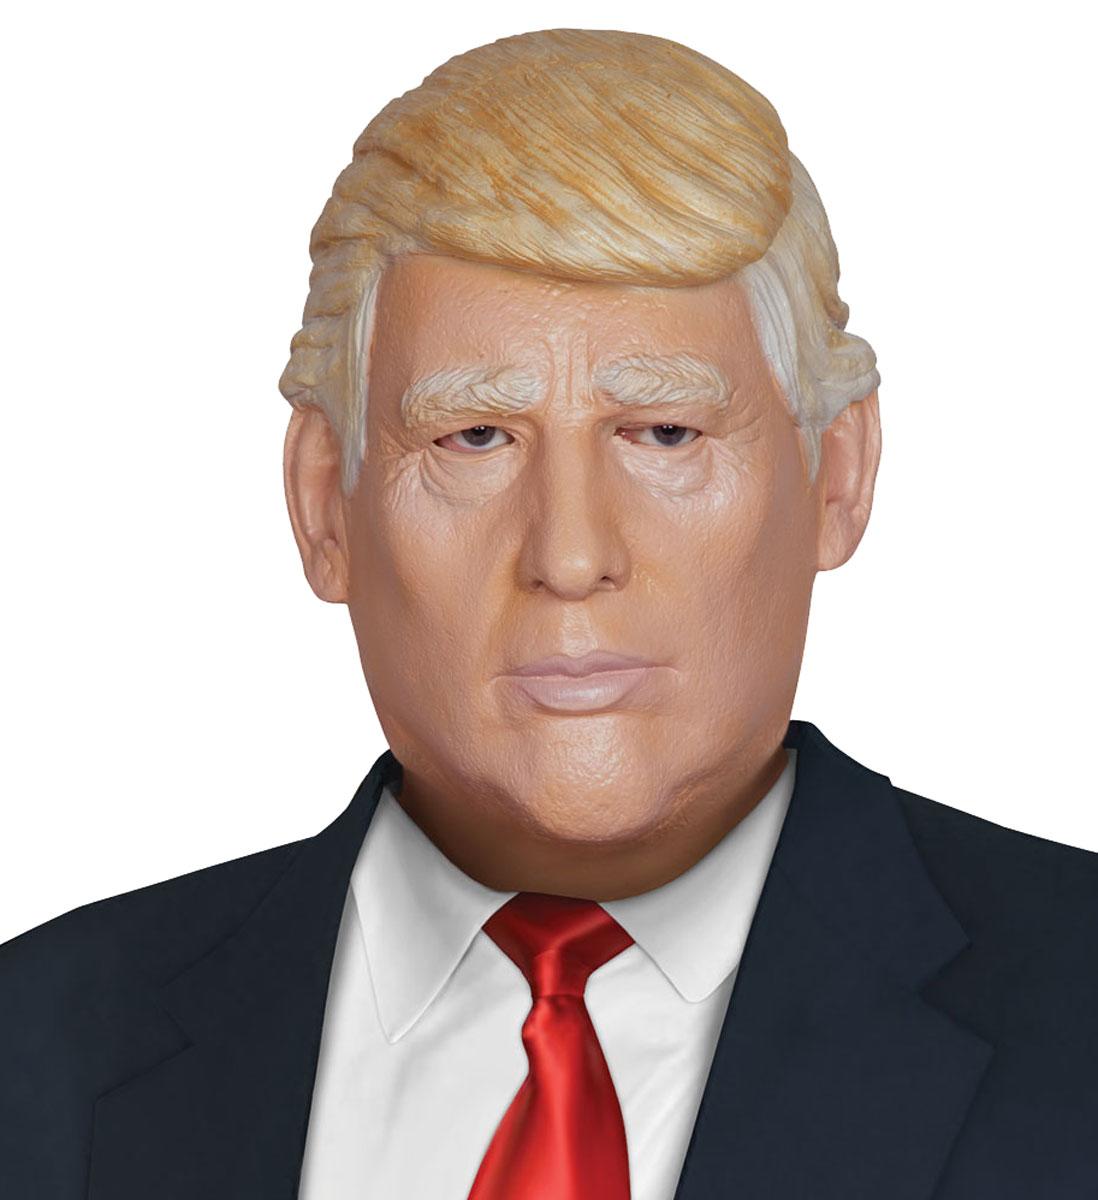 Donald Trump US President Mask by SVA 5039018 available from a collection of Trump Masks here at Karnival Costumes online party shop